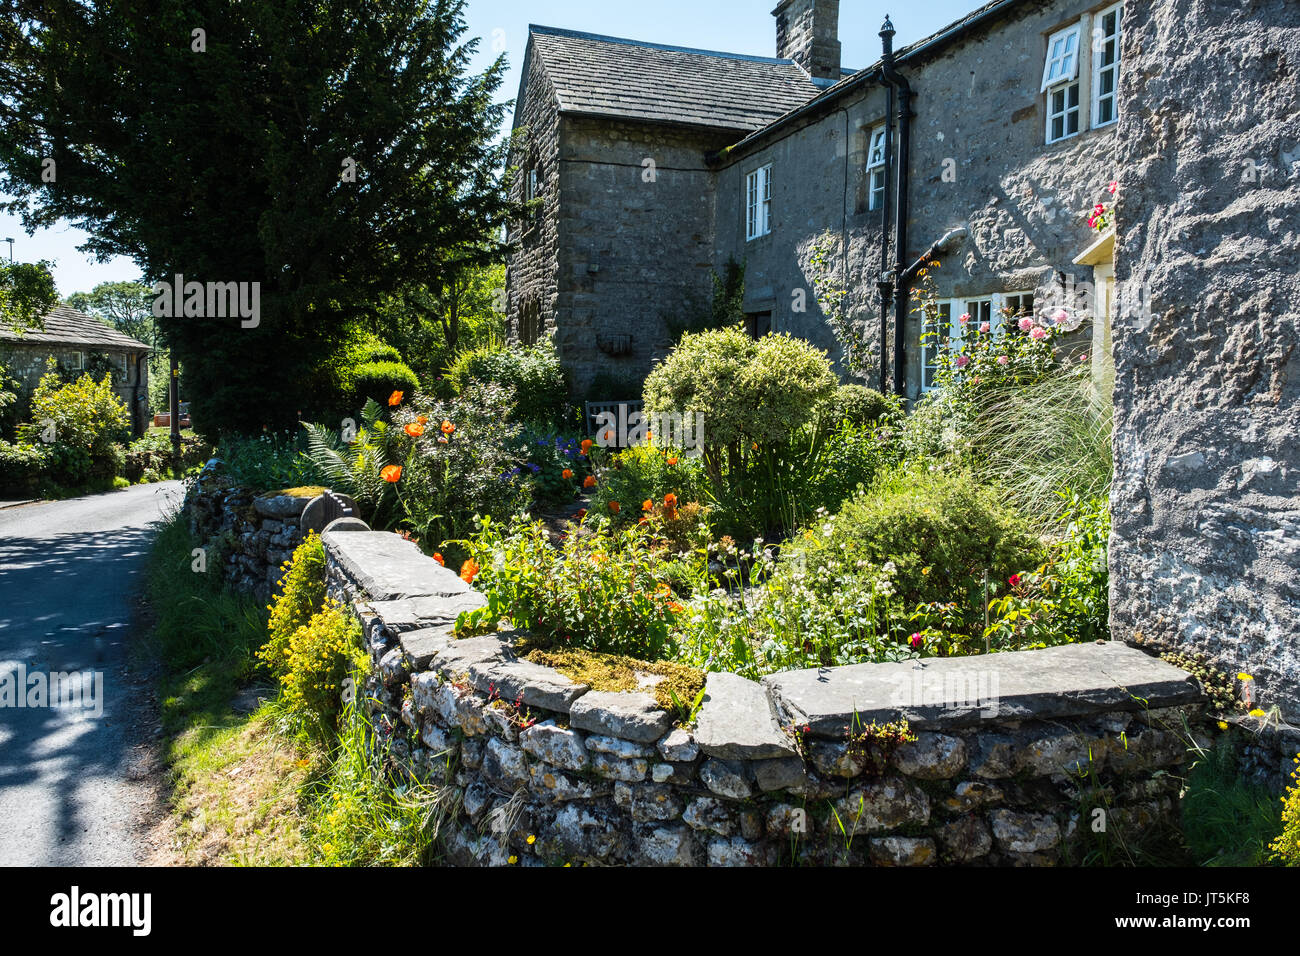 Yorkshire Stone Buildings and Gardens in Malham, North Yorkshire, UK. Stock Photo